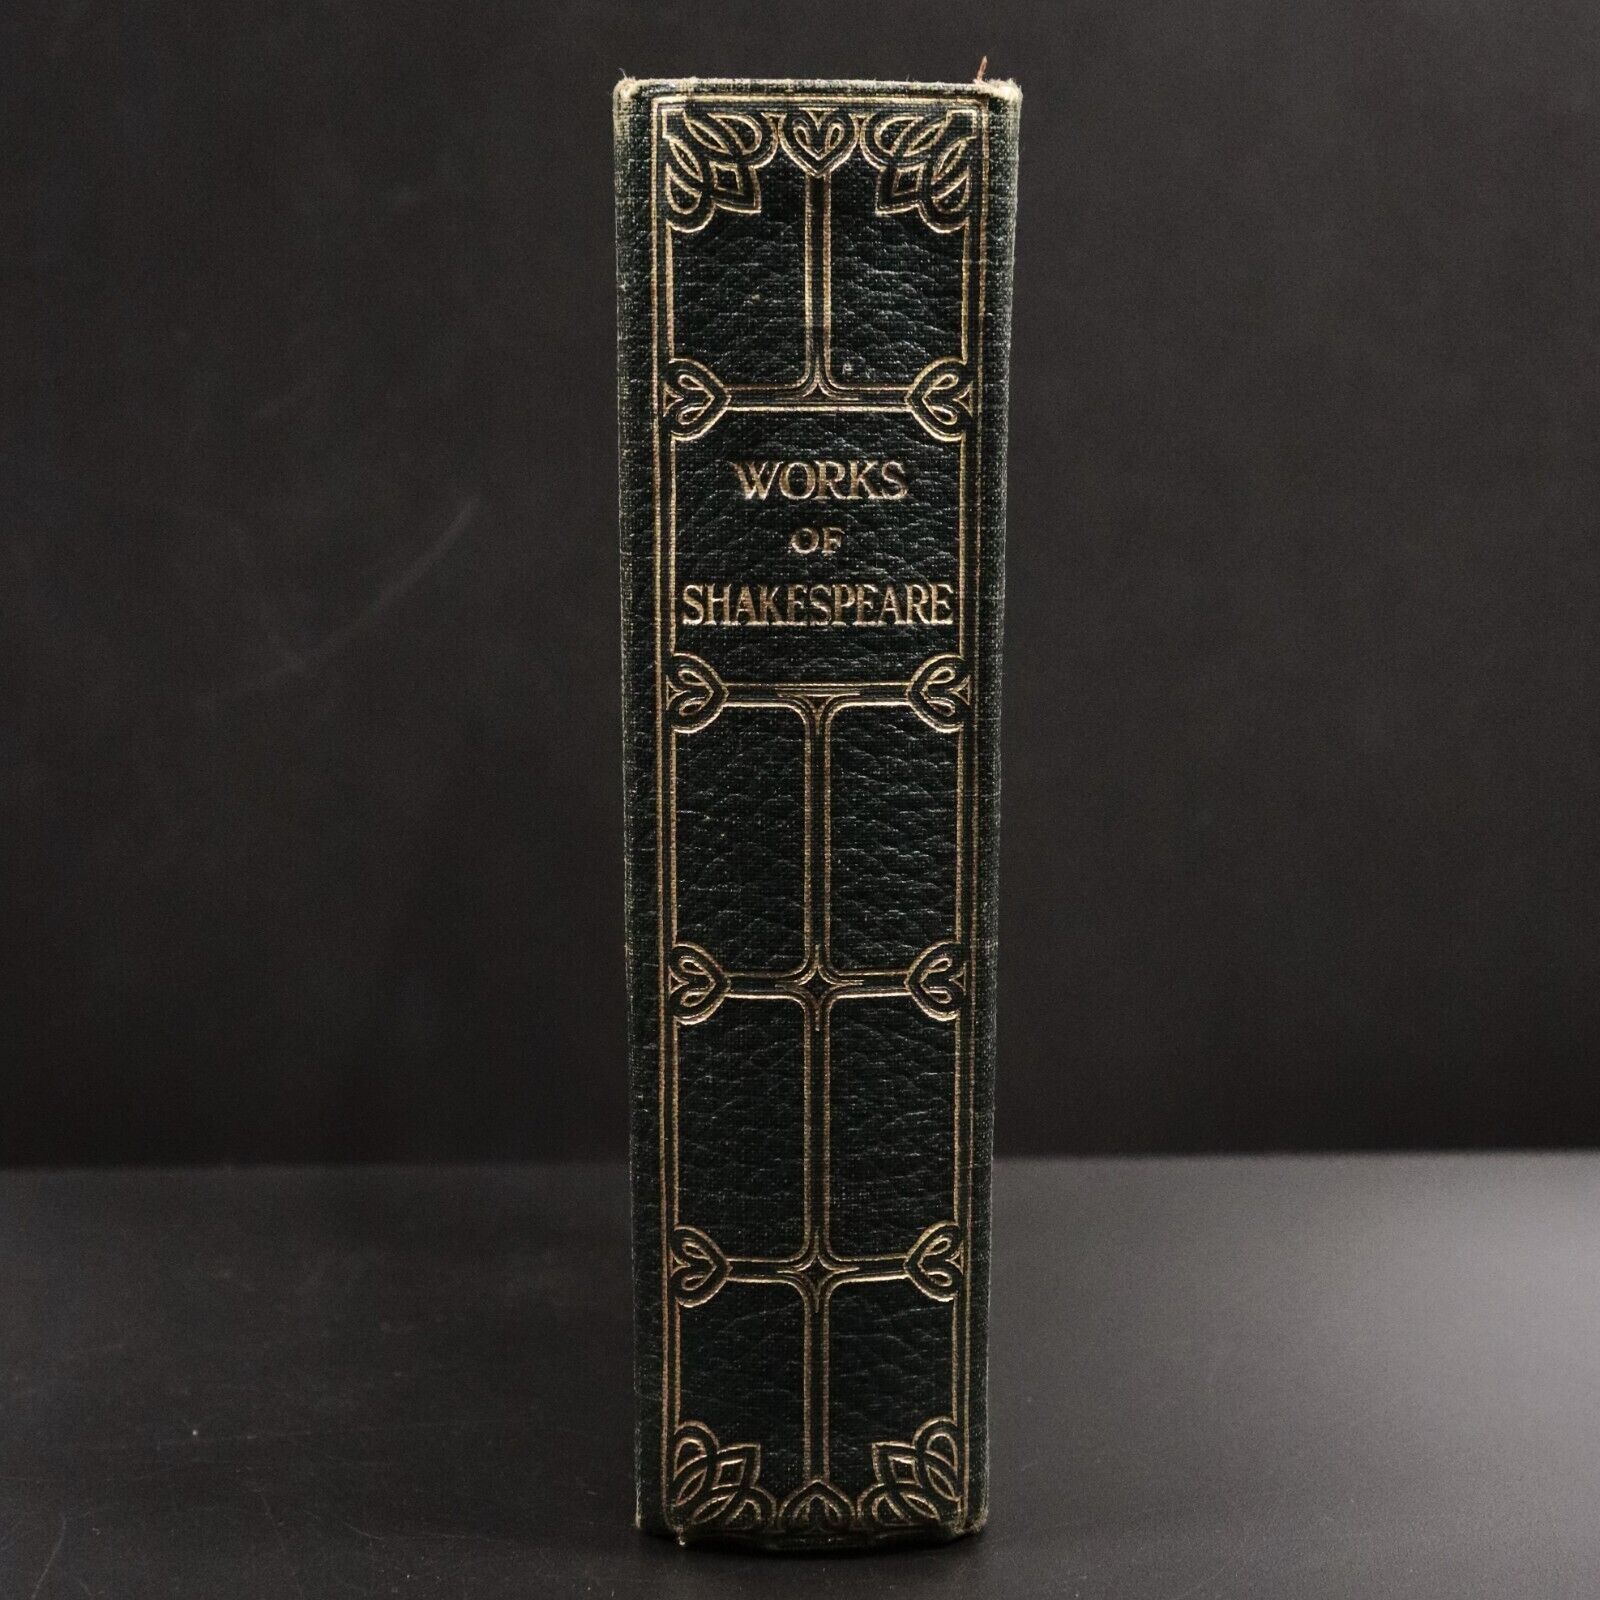 1923 The Complete Works Of Shakespeare Antique Literature Book Illustrated